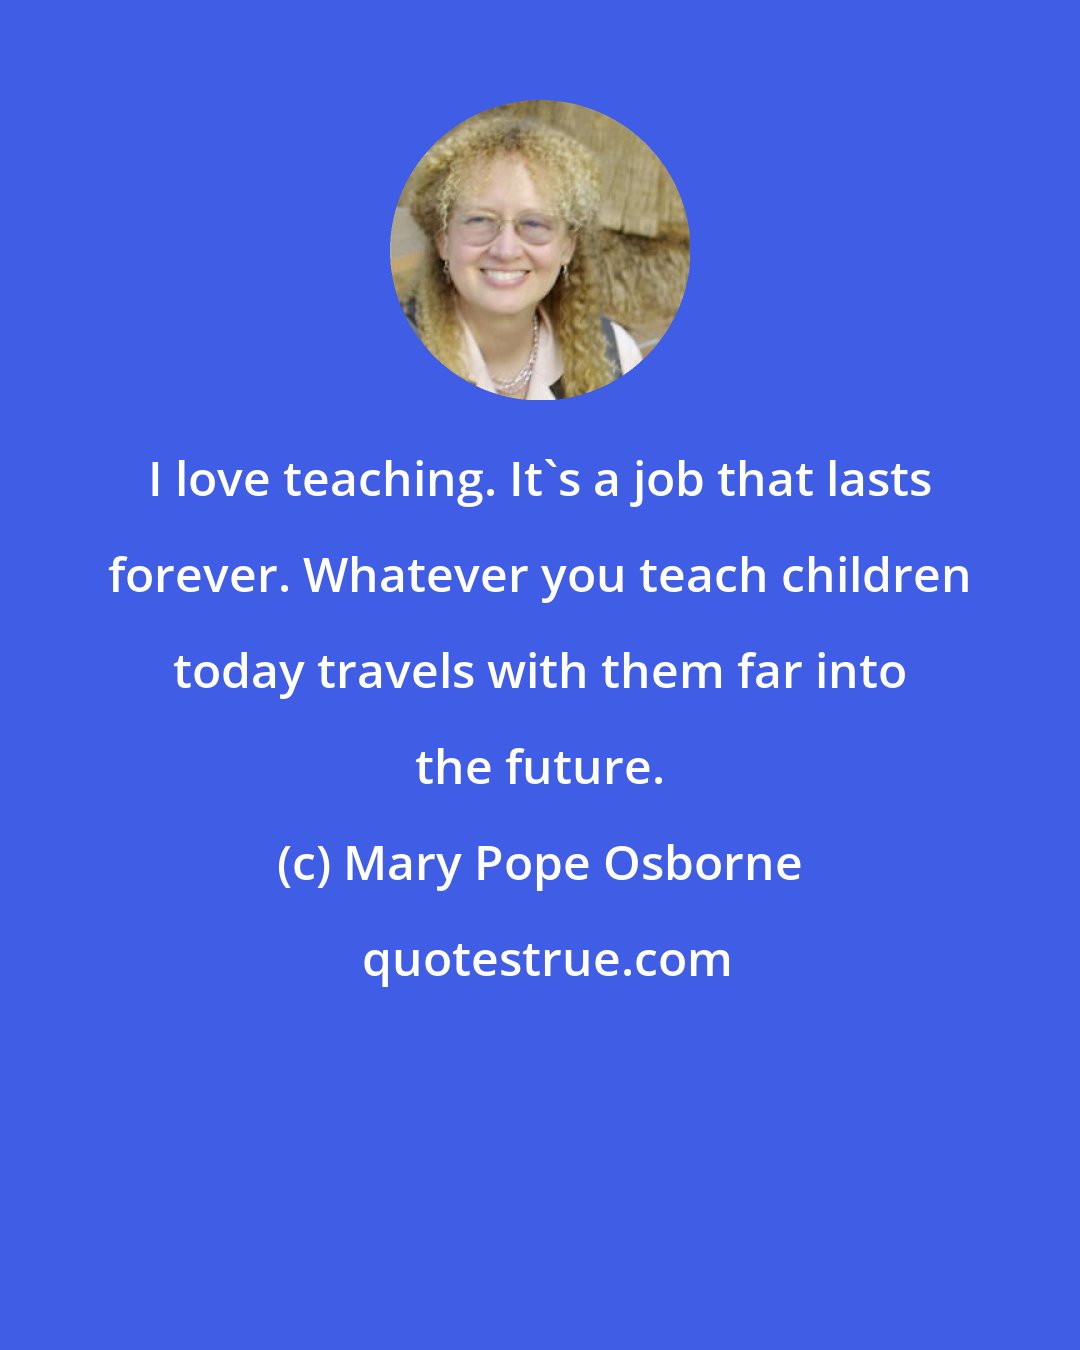 Mary Pope Osborne: I love teaching. It's a job that lasts forever. Whatever you teach children today travels with them far into the future.